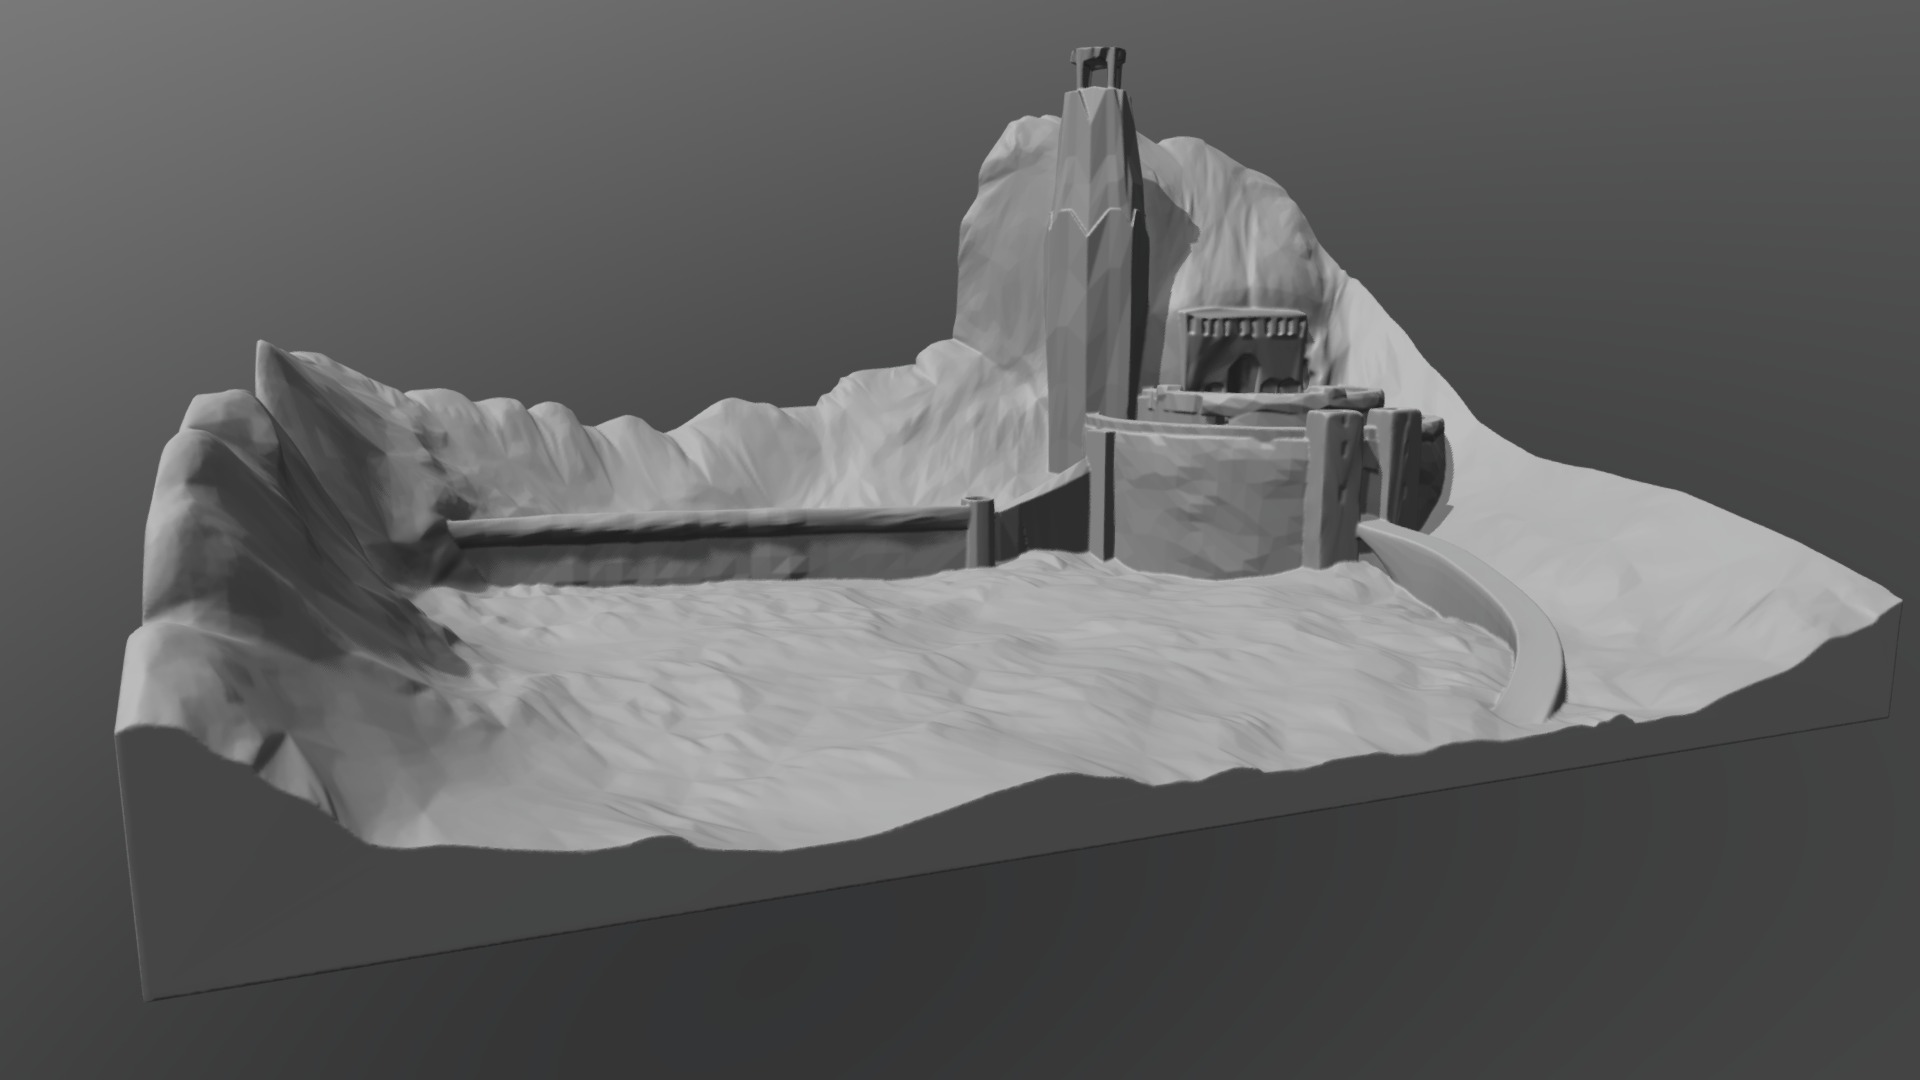 3D model Helms Deep for 3D printing - This is a 3D model of the Helms Deep for 3D printing. The 3D model is about a bed with a white sheet.